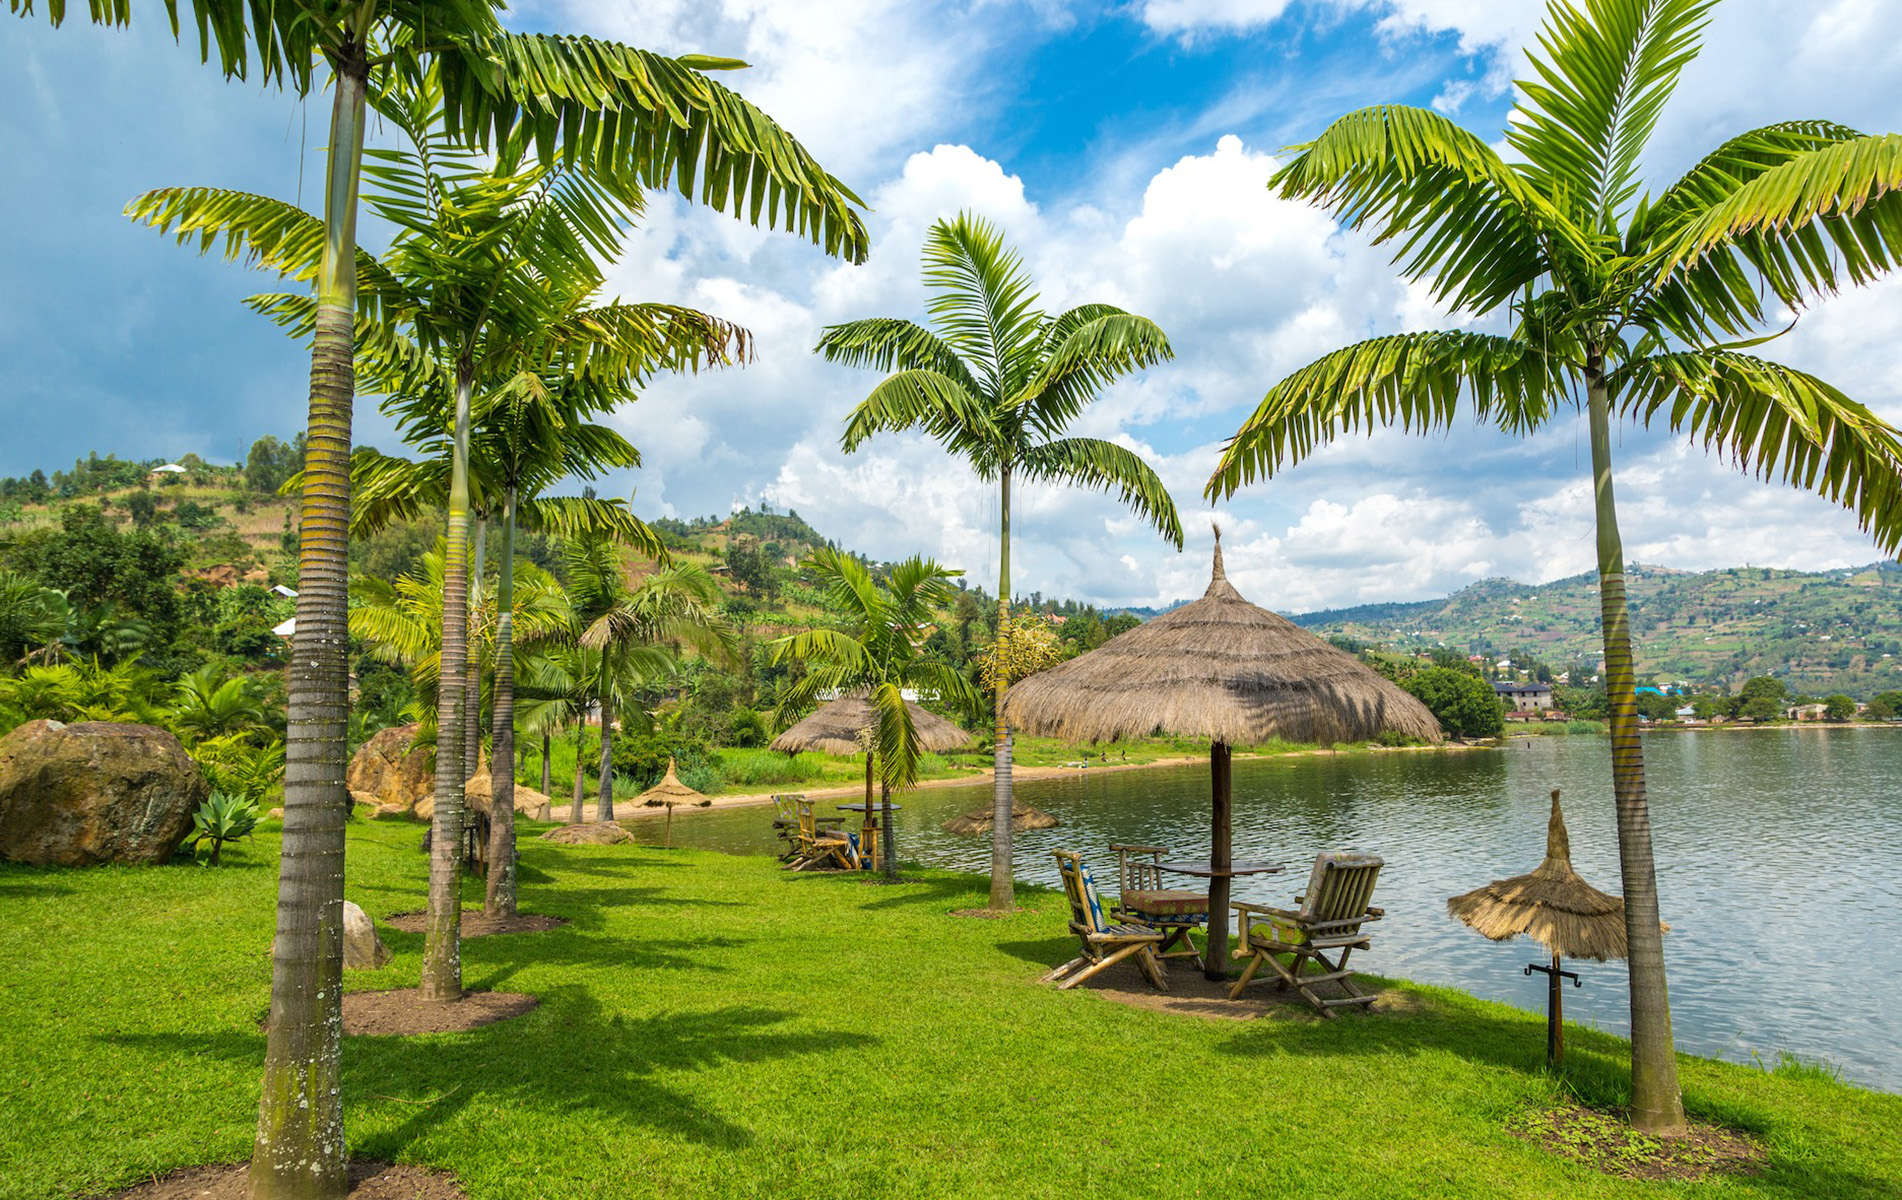 Rwanda self drive tours, relax by the shores of Lake Kivu, one of Africa's Great Lakes, and enjoy water-based activities like kayaking and swimming.